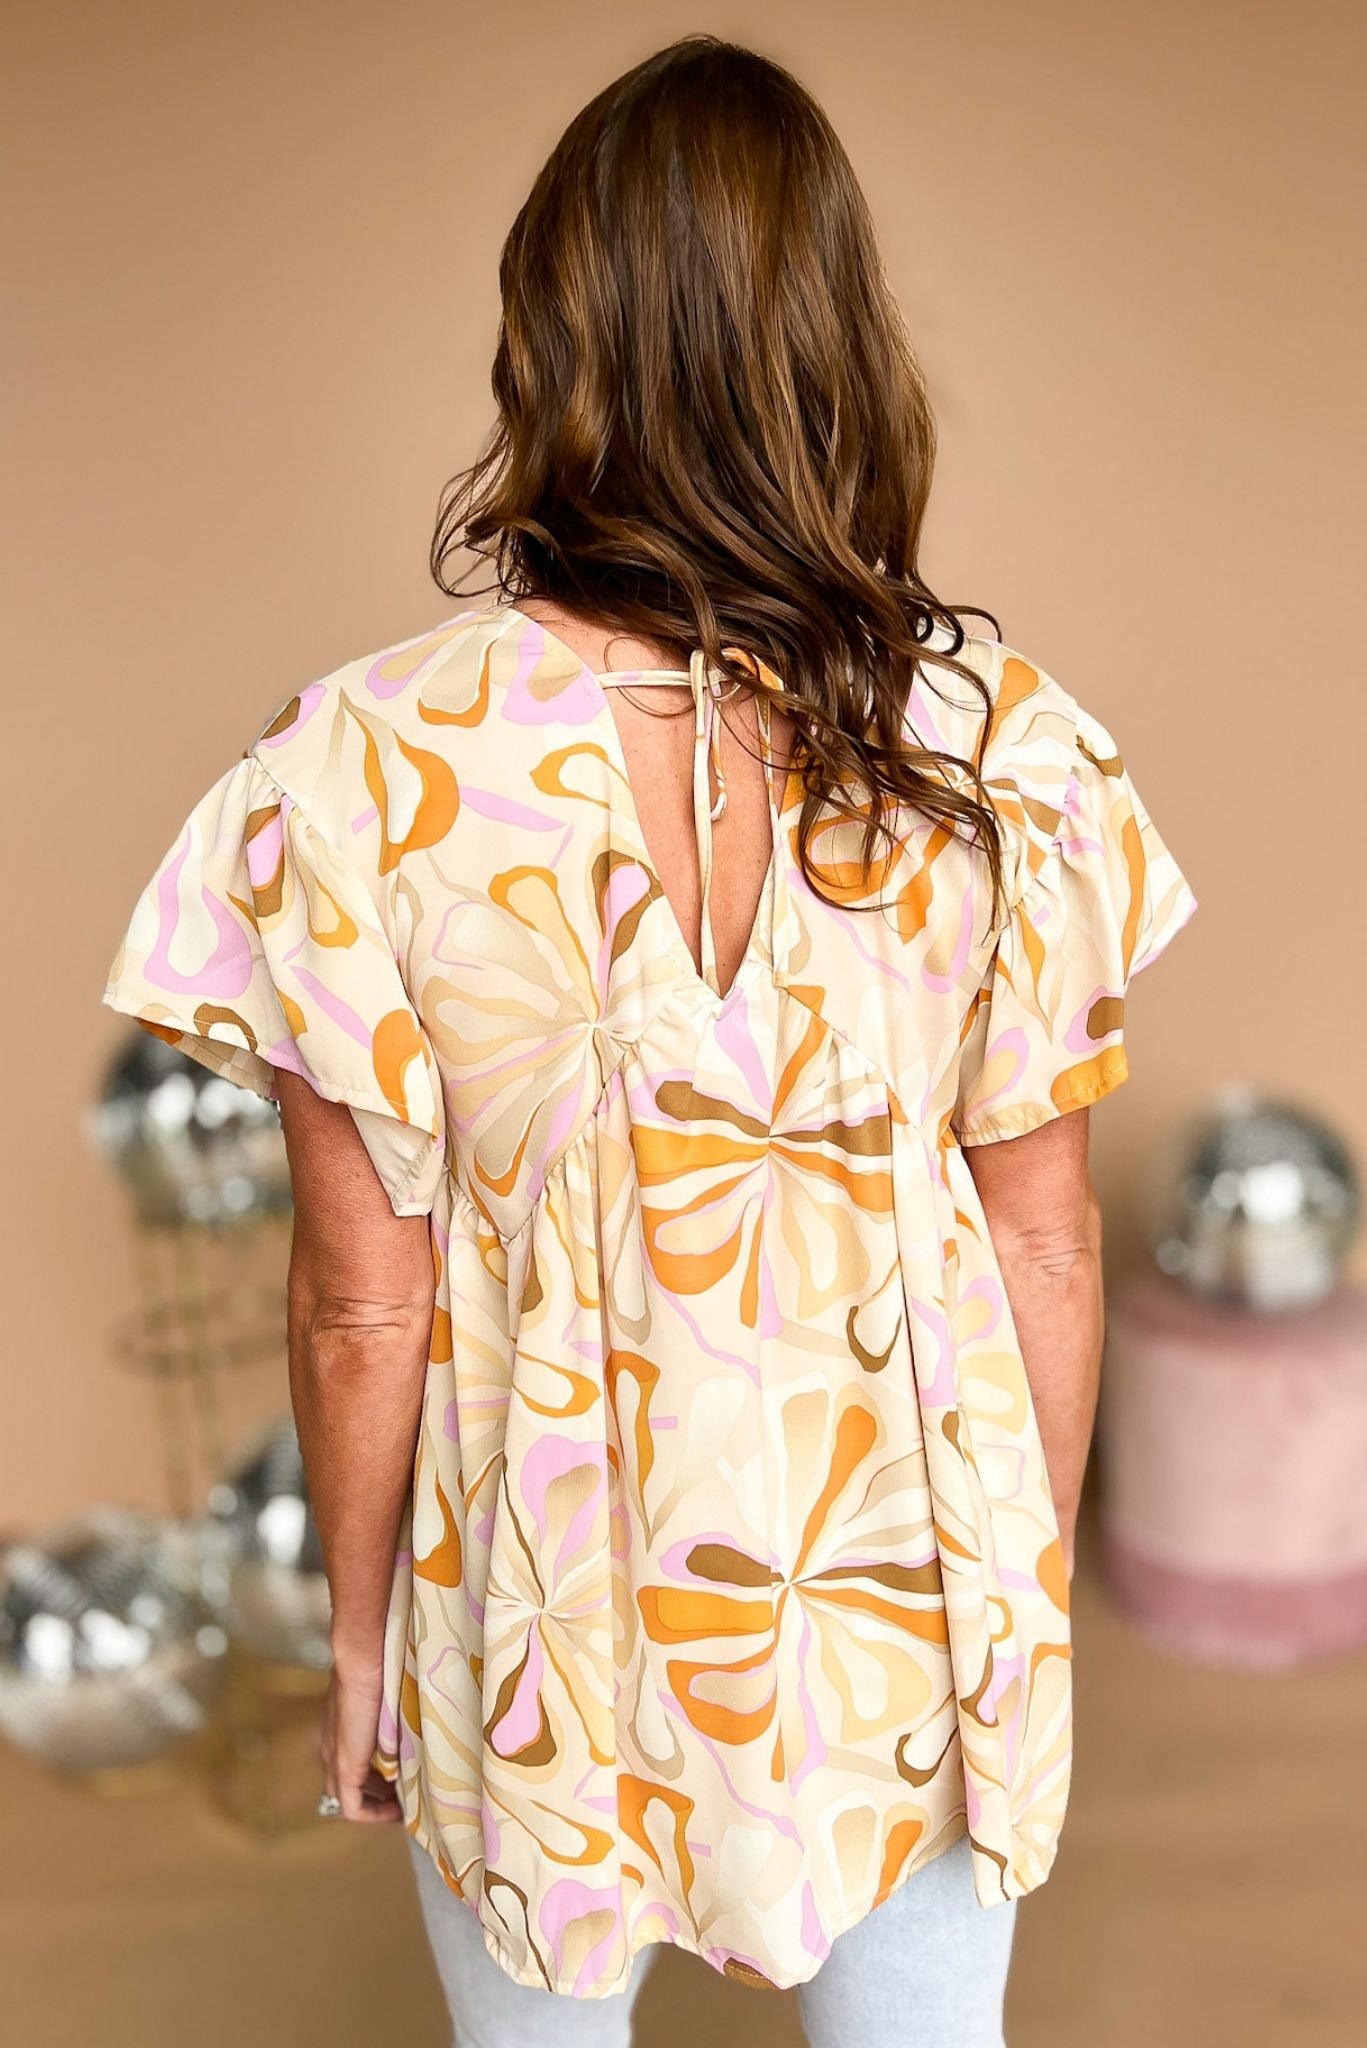 Load image into Gallery viewer, Tan Printed V Neck Short Sleeve Babydoll Top, swirl print, babydoll top, v neck, muist have, shop style your senses by mallory fitzsimmons
